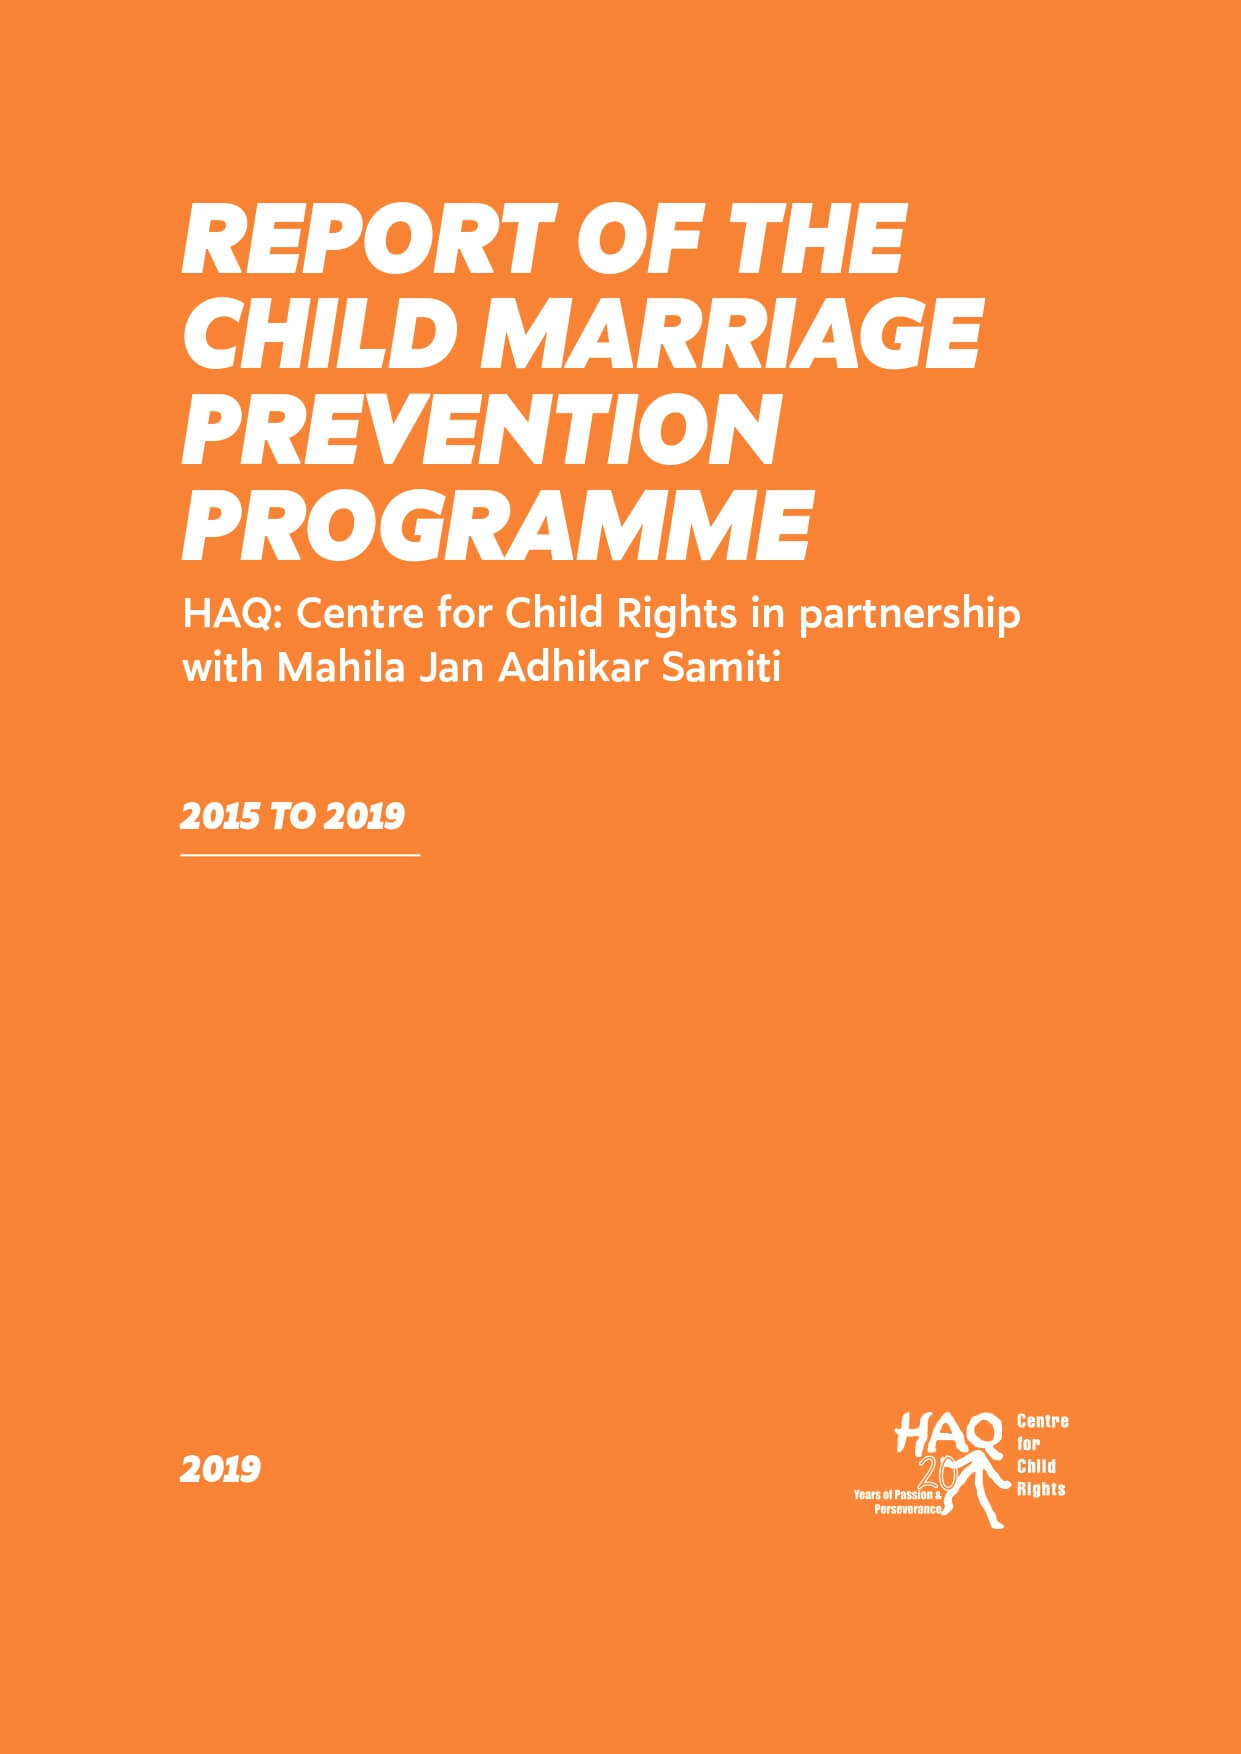 Report of the Child Marriage Prevention Programme 2015 to 2019 with MJAS